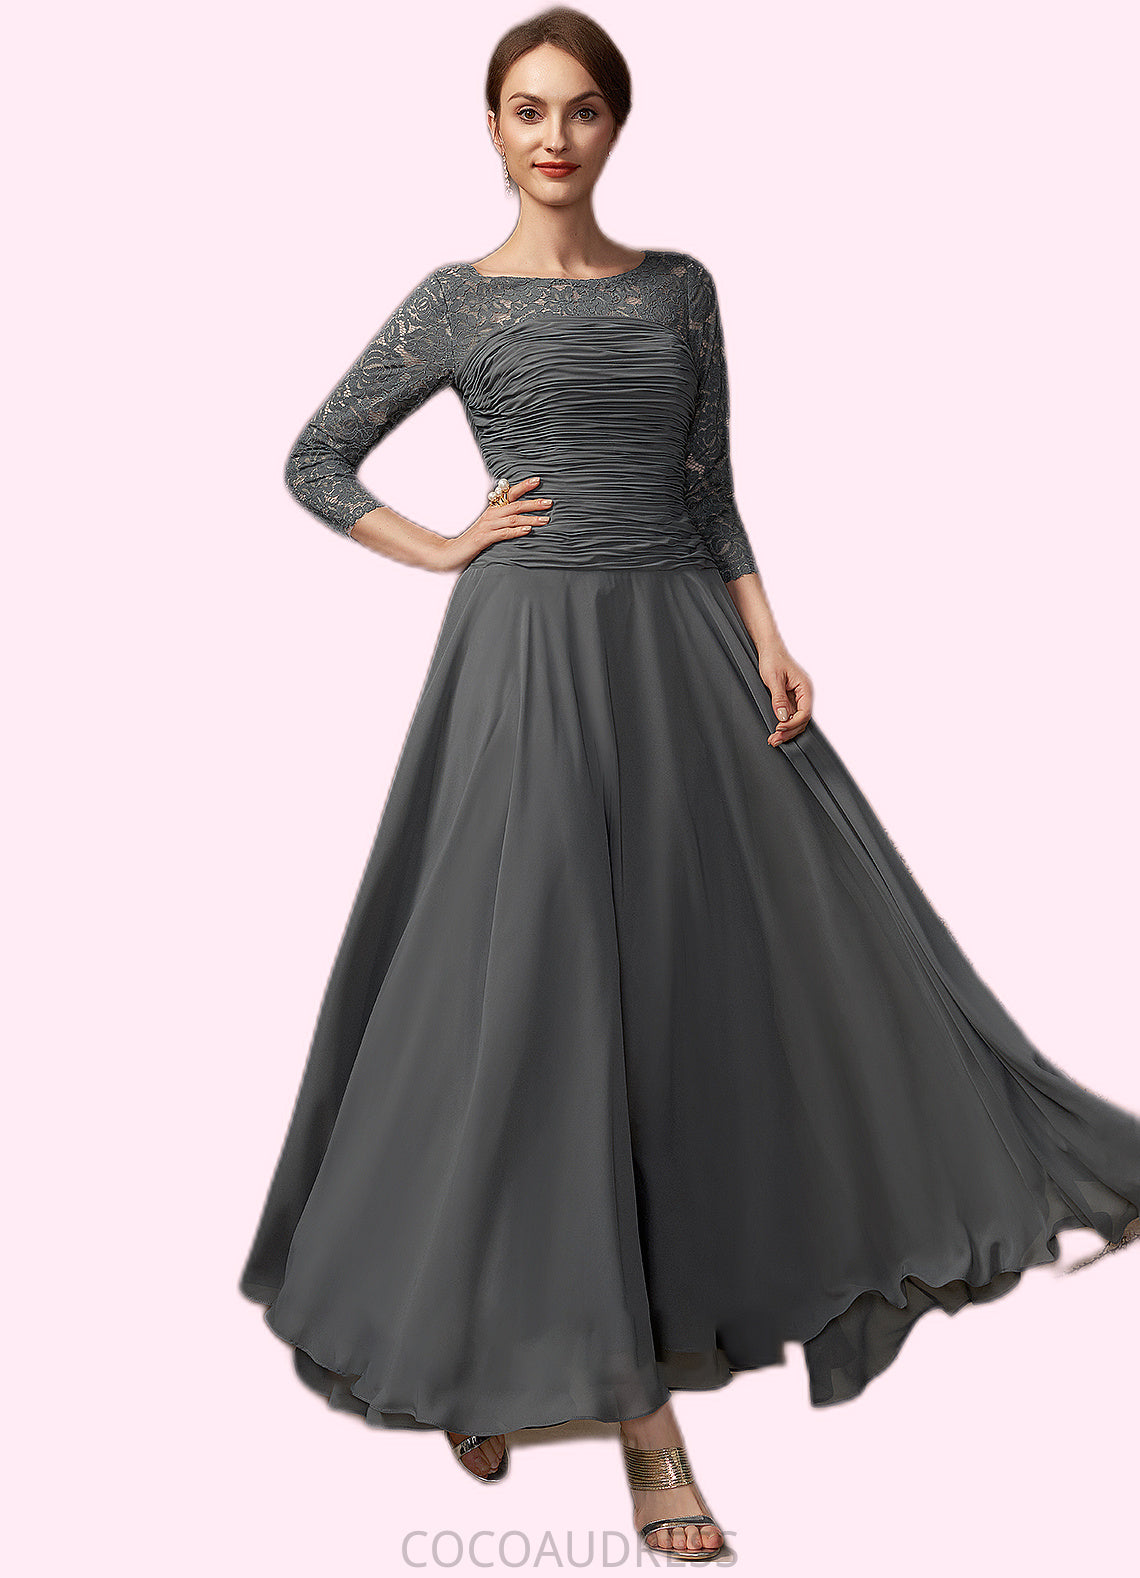 Aurora A-Line Scoop Neck Ankle-Length Chiffon Lace Mother of the Bride Dress With Ruffle 126P0014990